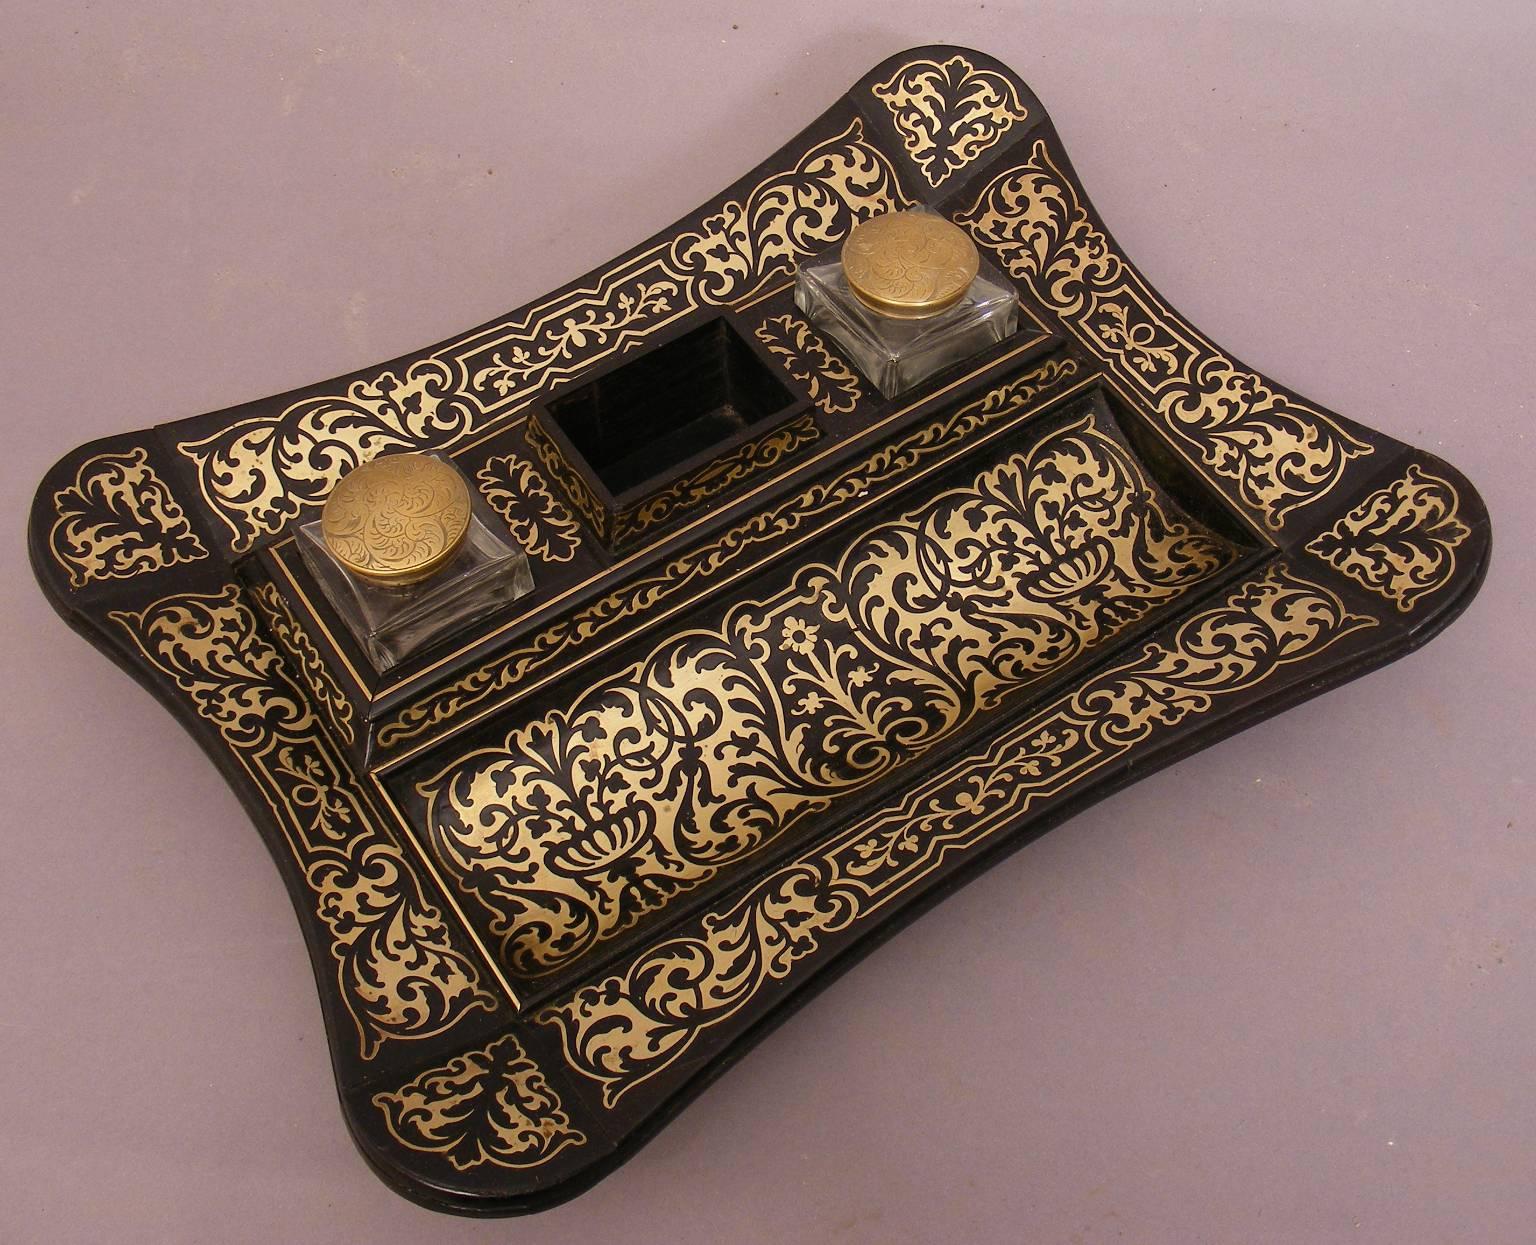 A superb pen and ink stand of the Regency period. Inlaid with brass on an ebony and rosewood frame. It retains the original glass ink wells with screw on brass lids engraved with a floral motif.

This piece is in excellent condition and would